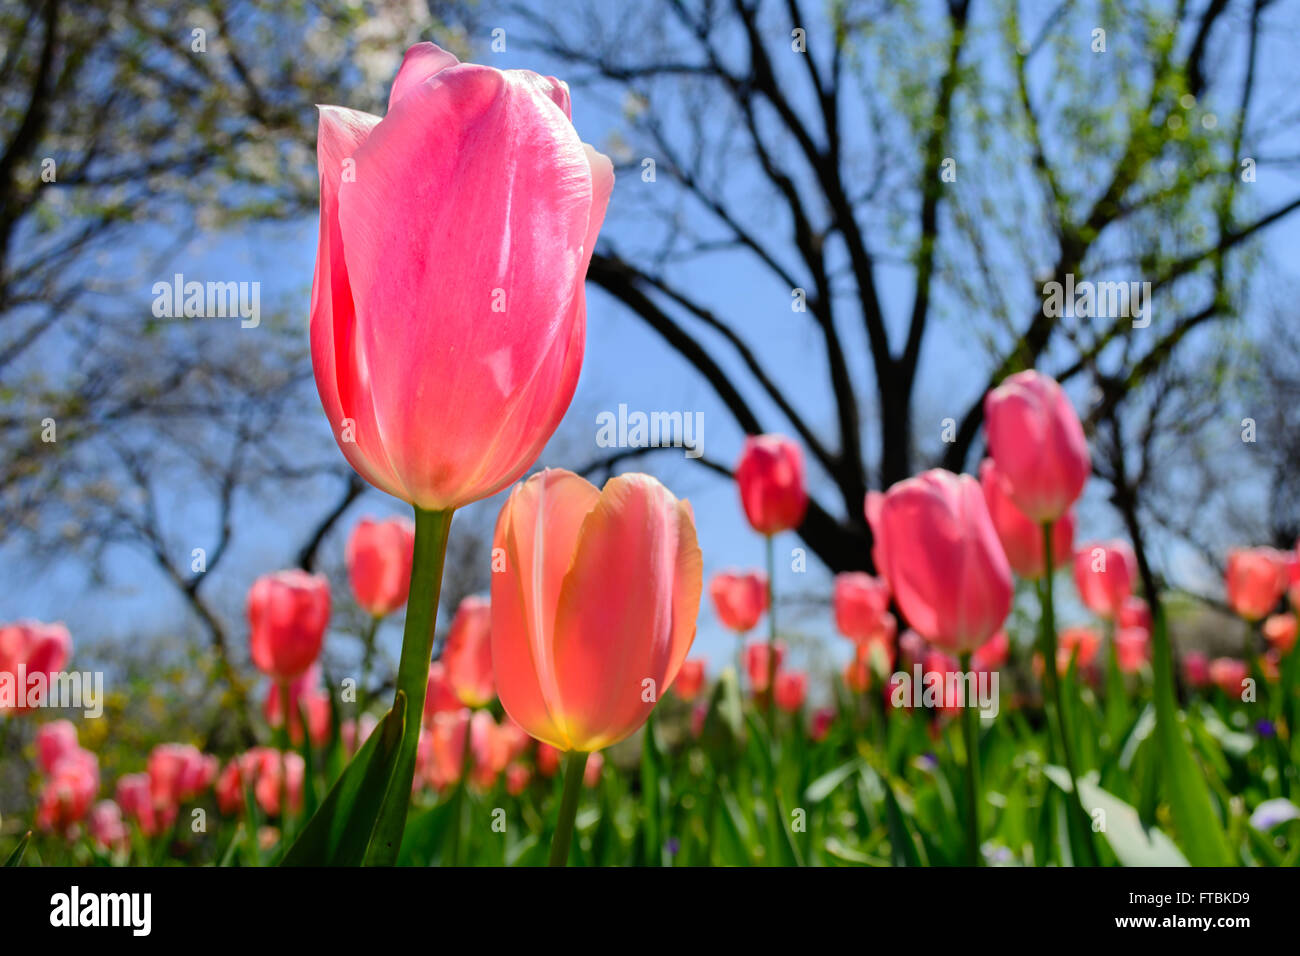 Single Pink Tulip Selective Focus Foreground with Cherry Blossoms Trees and Tulips in background Stand up, Stand out, Stand Tall Stock Photo